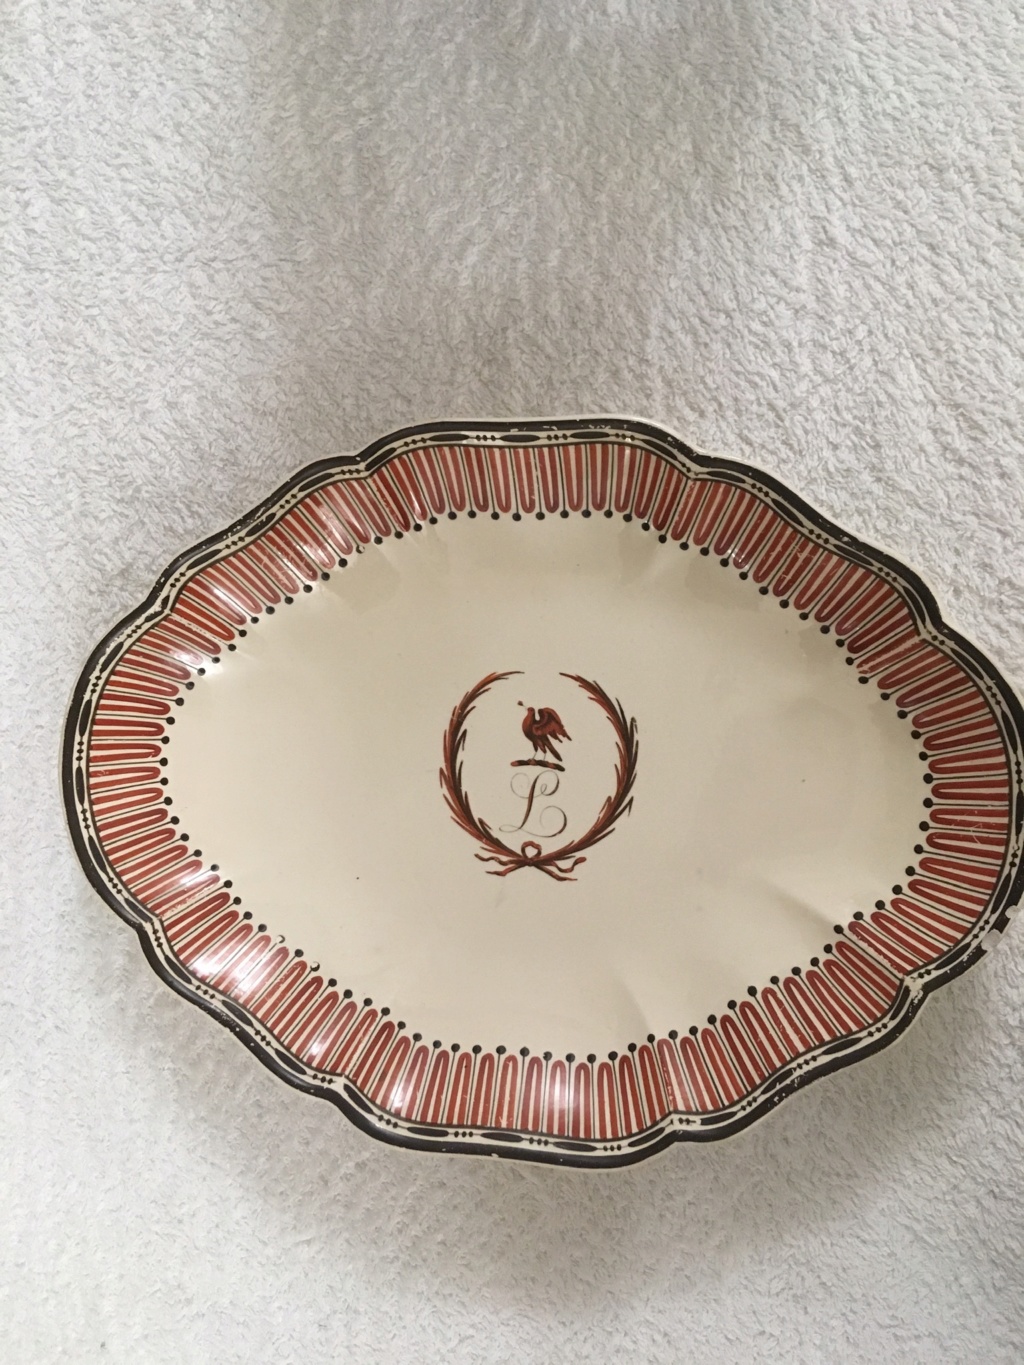 Help dating an early piece of Wedgwood? B75cd610